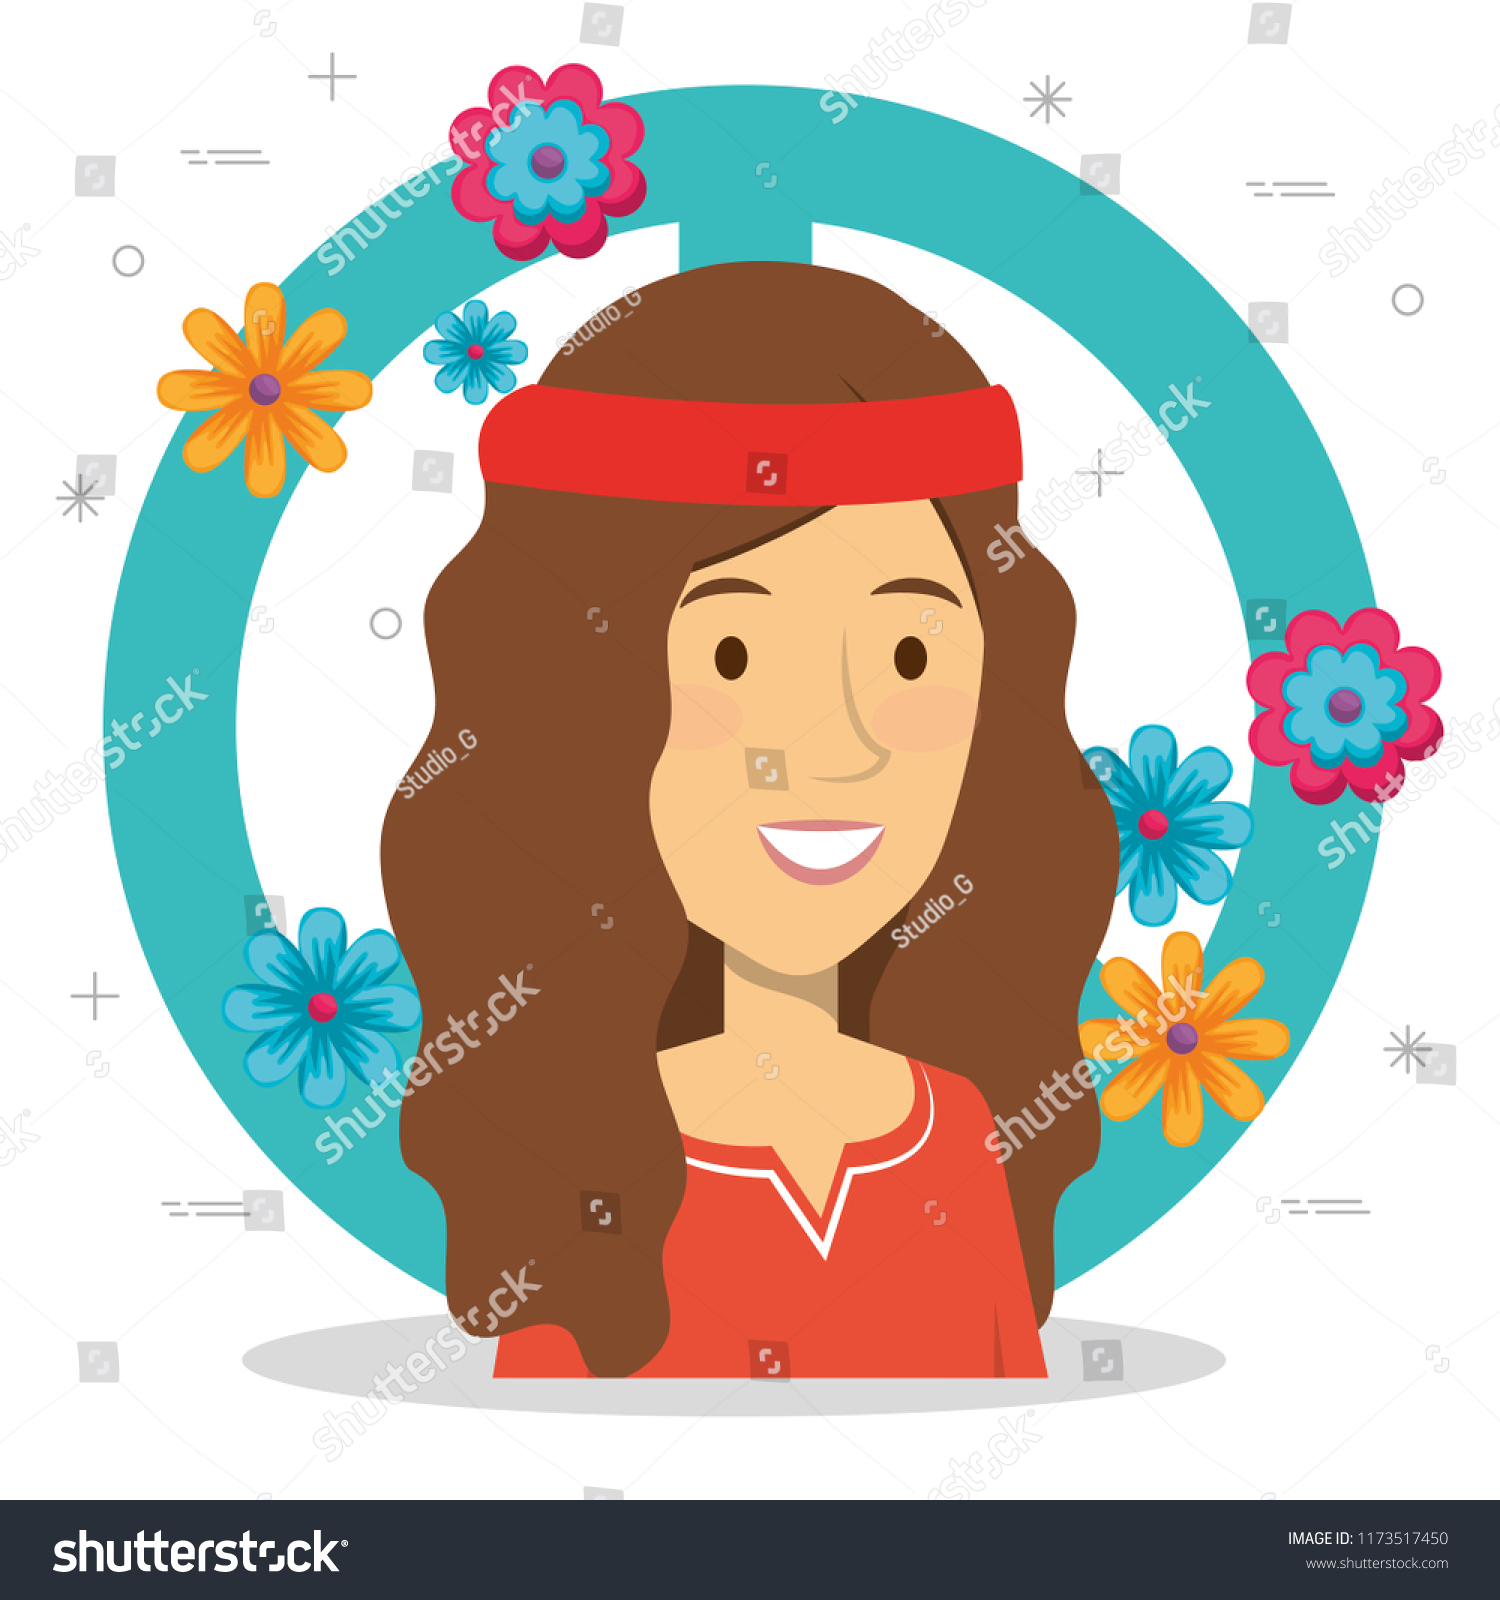 Woman Hippie Lifestyle Characters Stock Vector Royalty Free 1173517450 Shutterstock